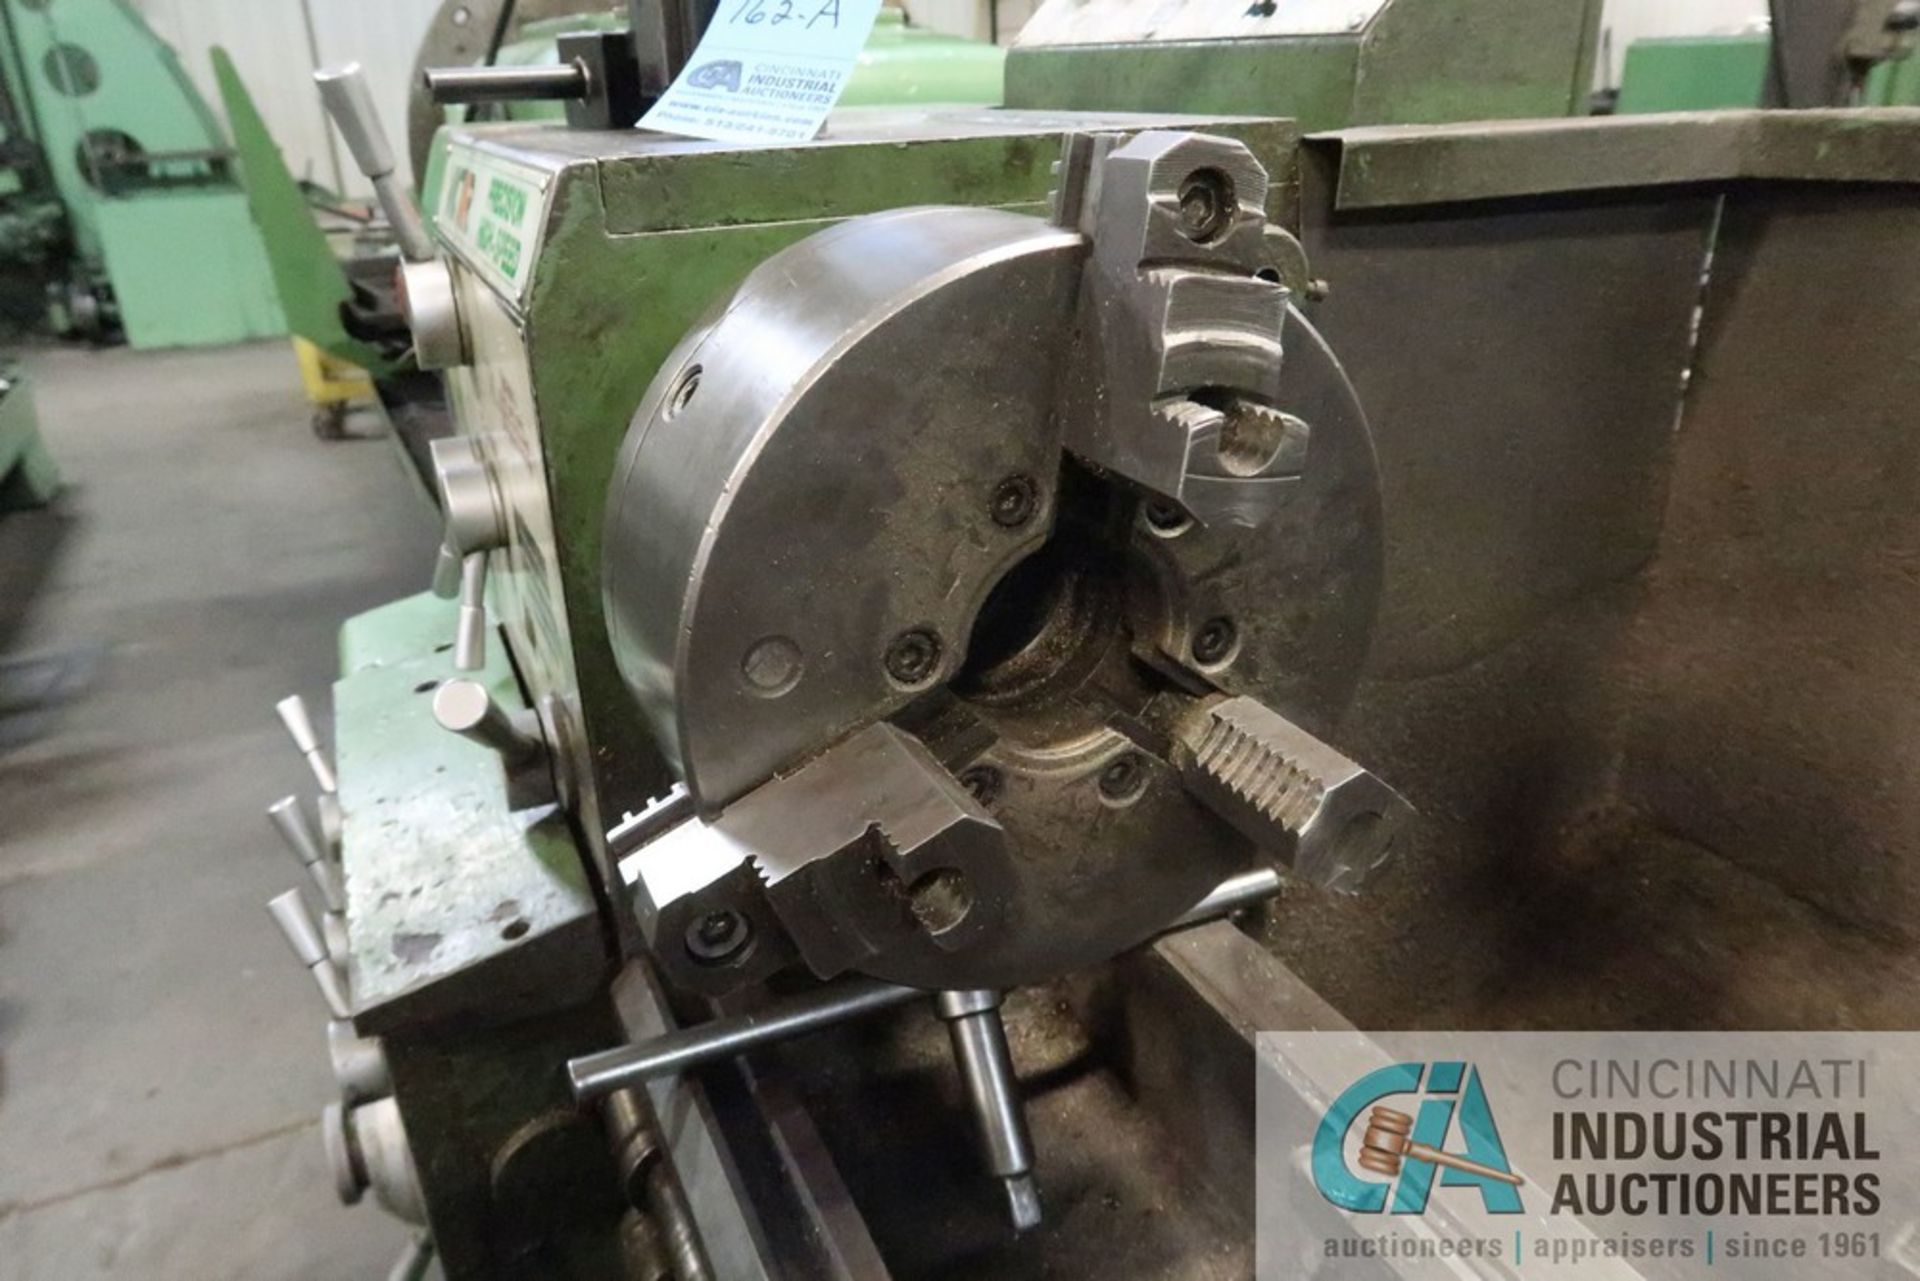 16" X 40" VICTOR MODEL 1640B PRECISION HIGH SPEED LATHE, 10" 3-JAW CHUCK, STEADY REST, TAILSTOCK, - Image 7 of 12